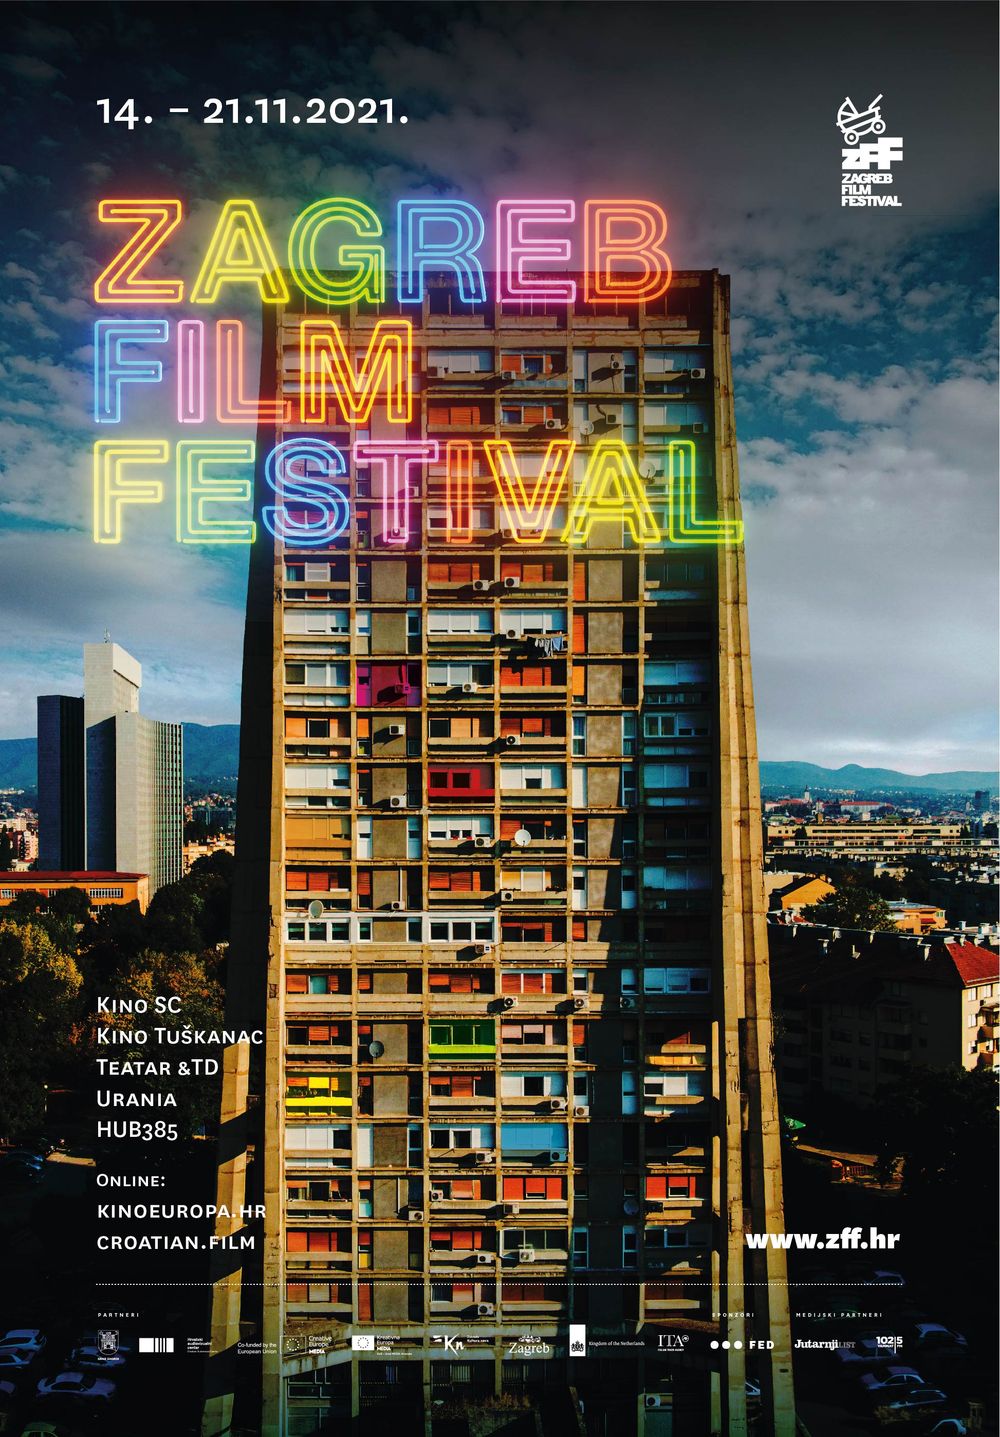 FIRST HITS REVEALED AHEAD OF THE 19th ZAGREB FILM FESTIVAL